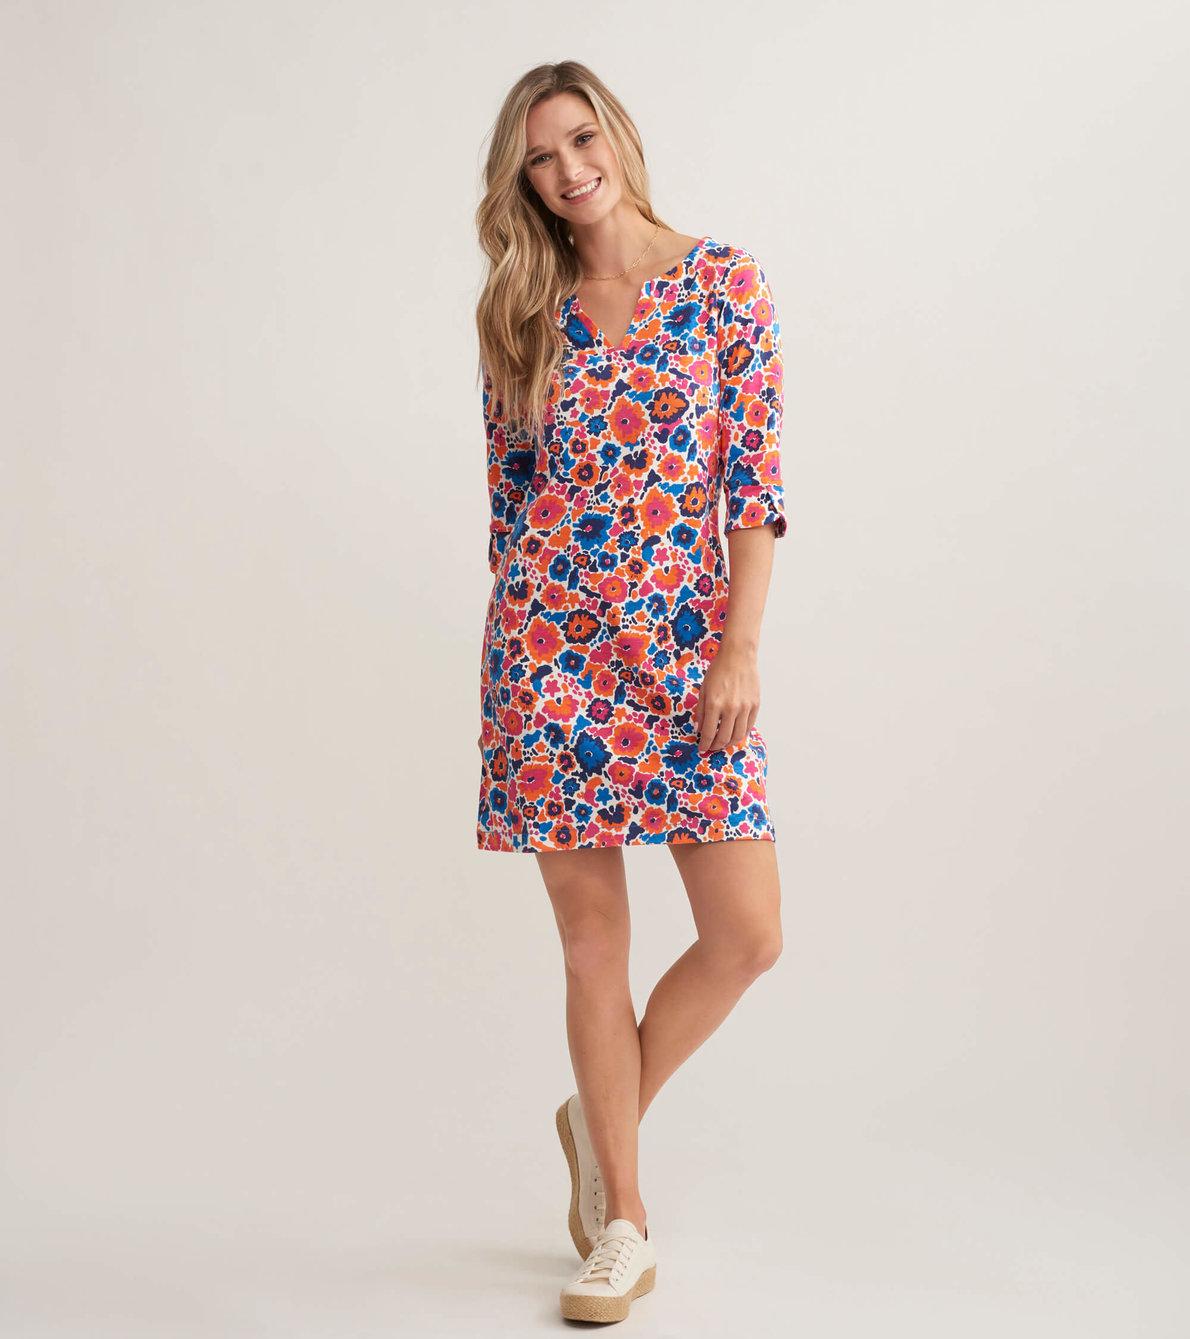 View larger image of Lucy Dress - Pop Out Floral